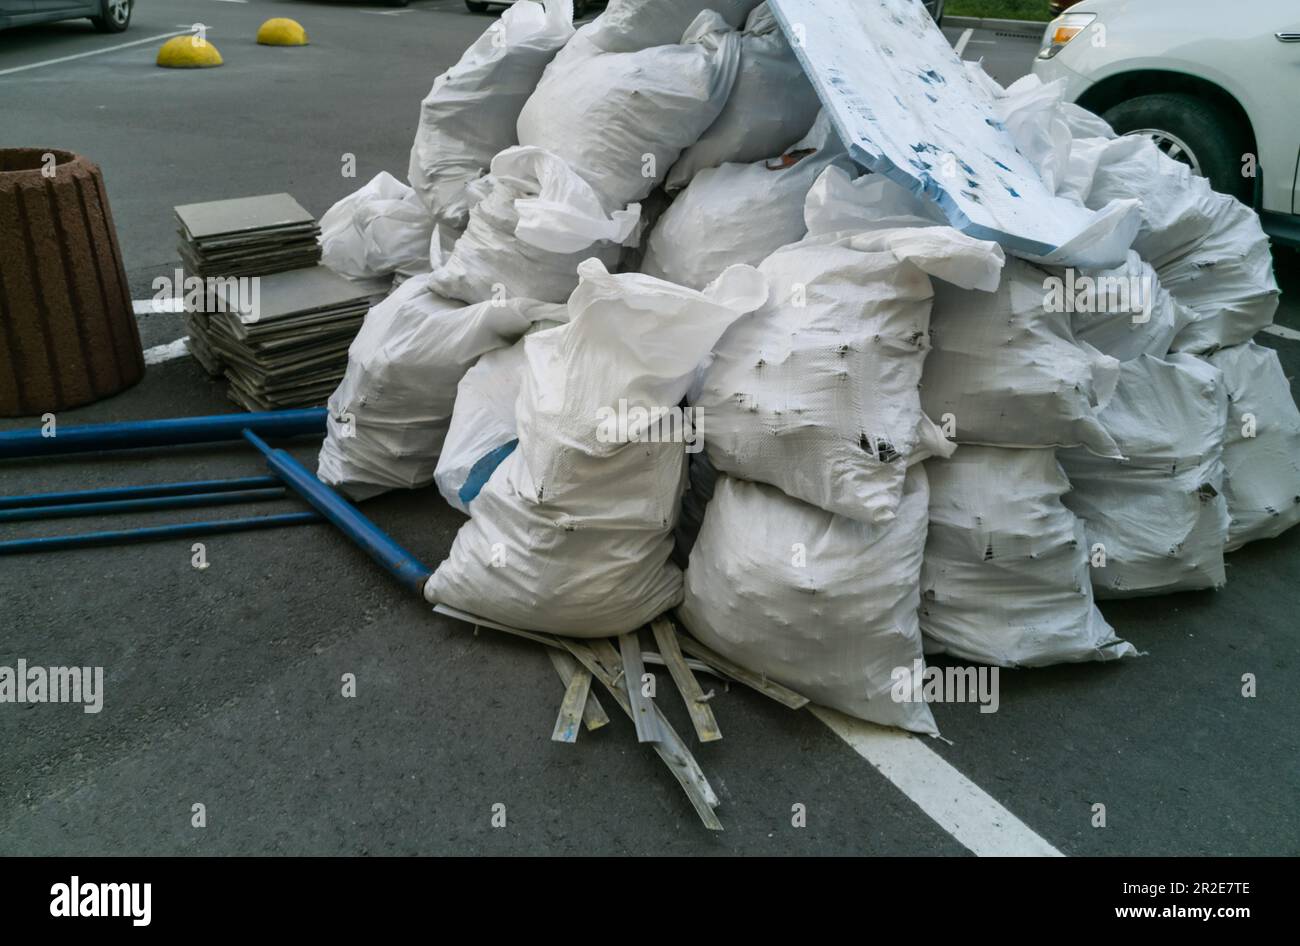 https://c8.alamy.com/comp/2R2E7TE/white-construction-garbage-bags-construction-garbage-bags-piled-on-top-of-one-another-a-large-pile-of-construction-garbage-bags-abstract-background-2R2E7TE.jpg